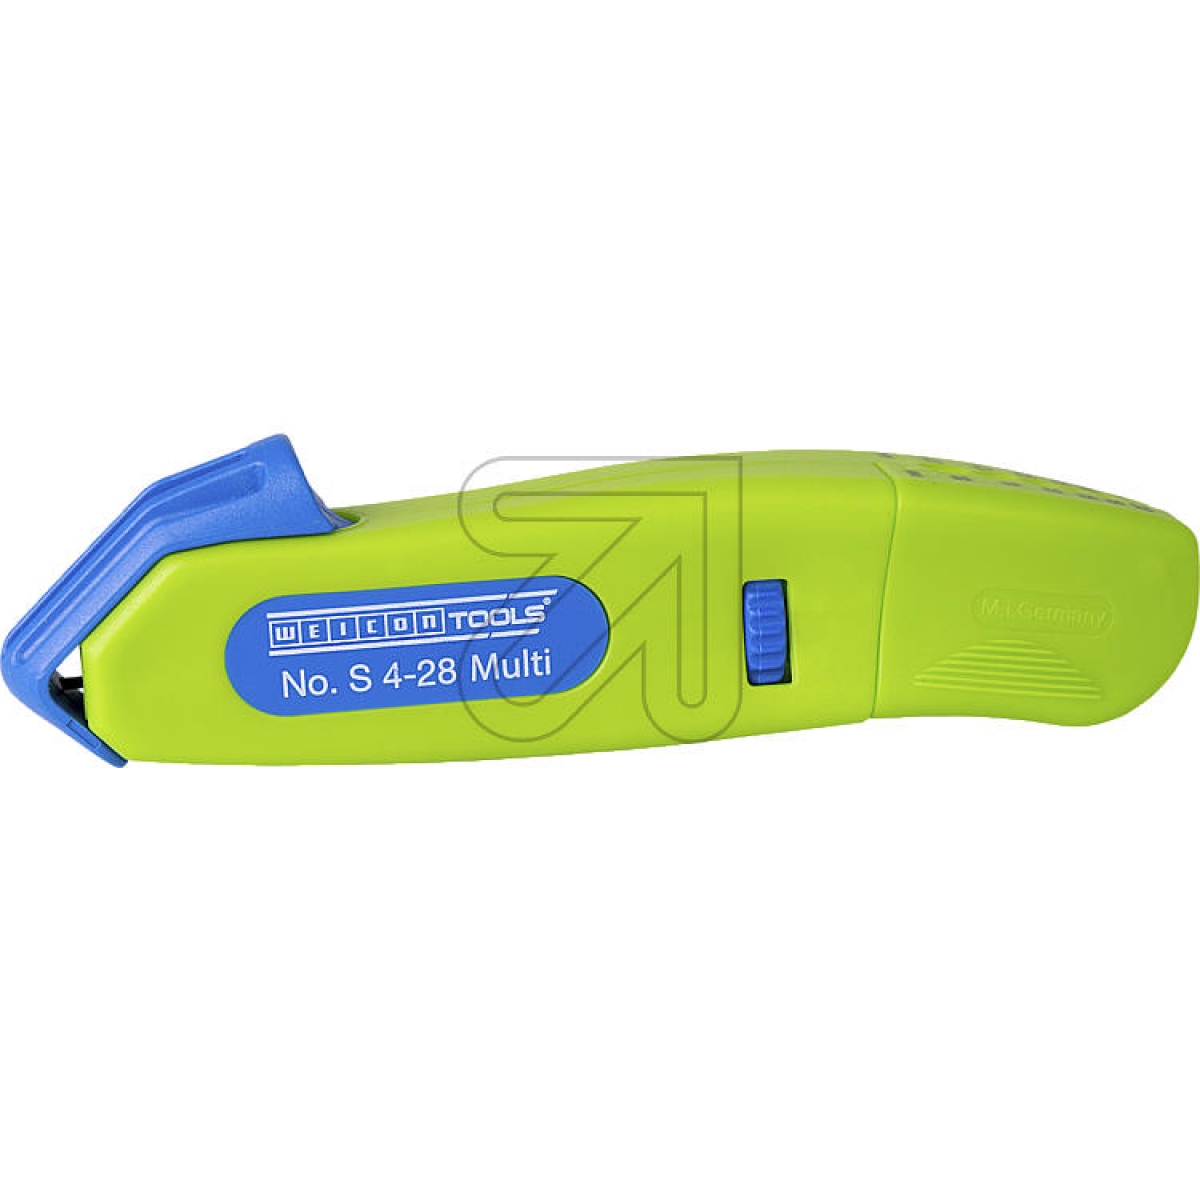 WEICONCable Knife S 4-28 - Multi - Green LineArticle-No: 756265